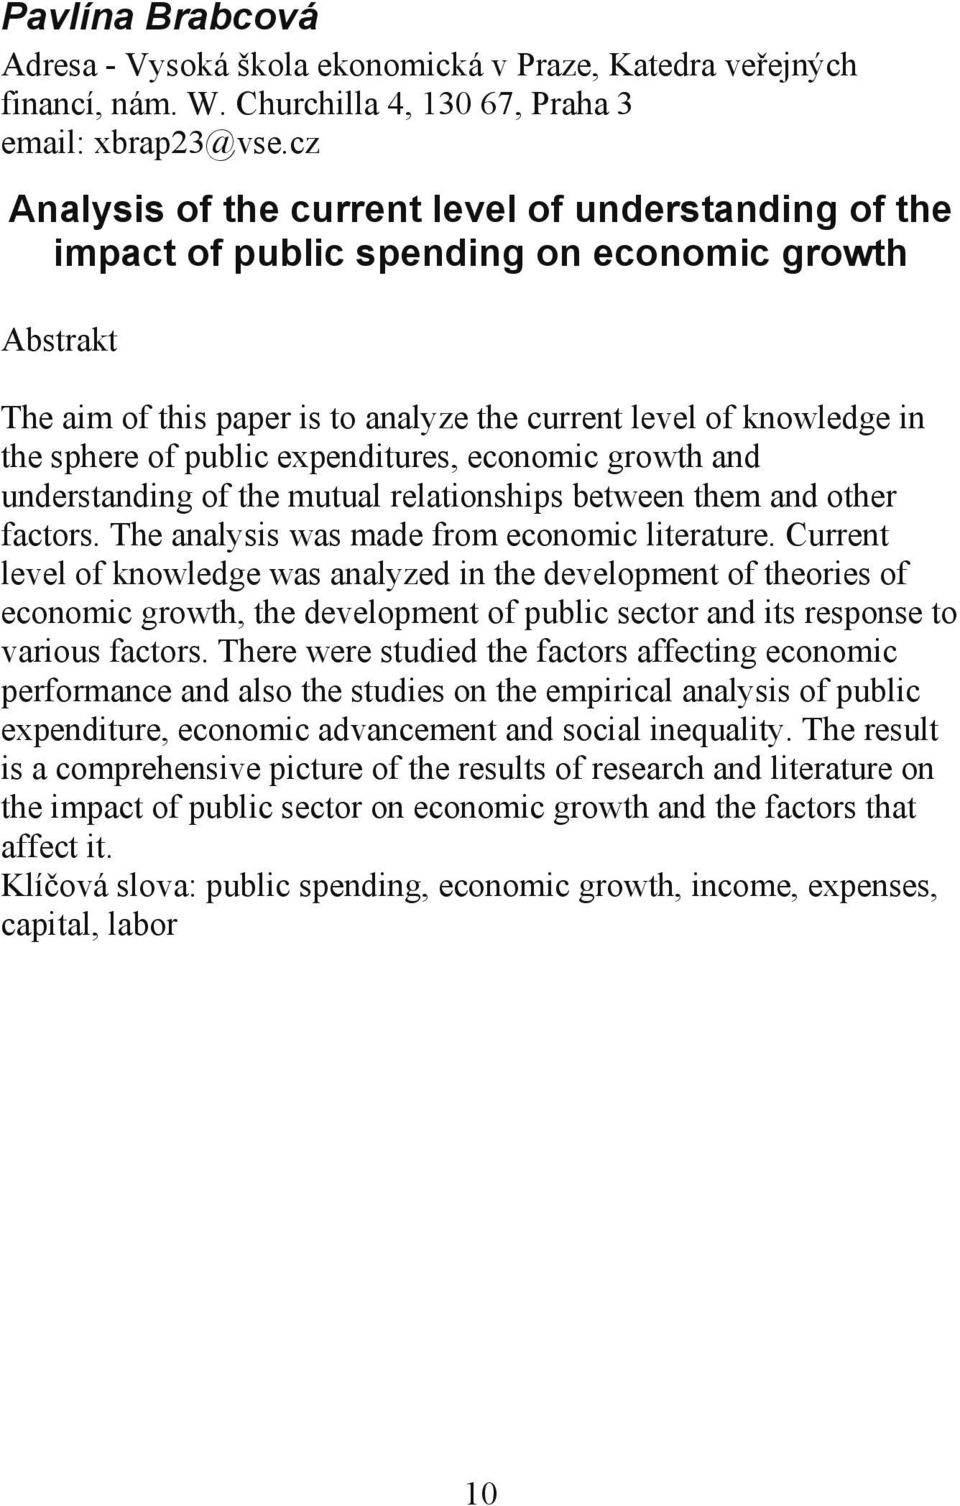 expenditures, economic growth and understanding of the mutual relationships between them and other factors. The analysis was made from economic literature.